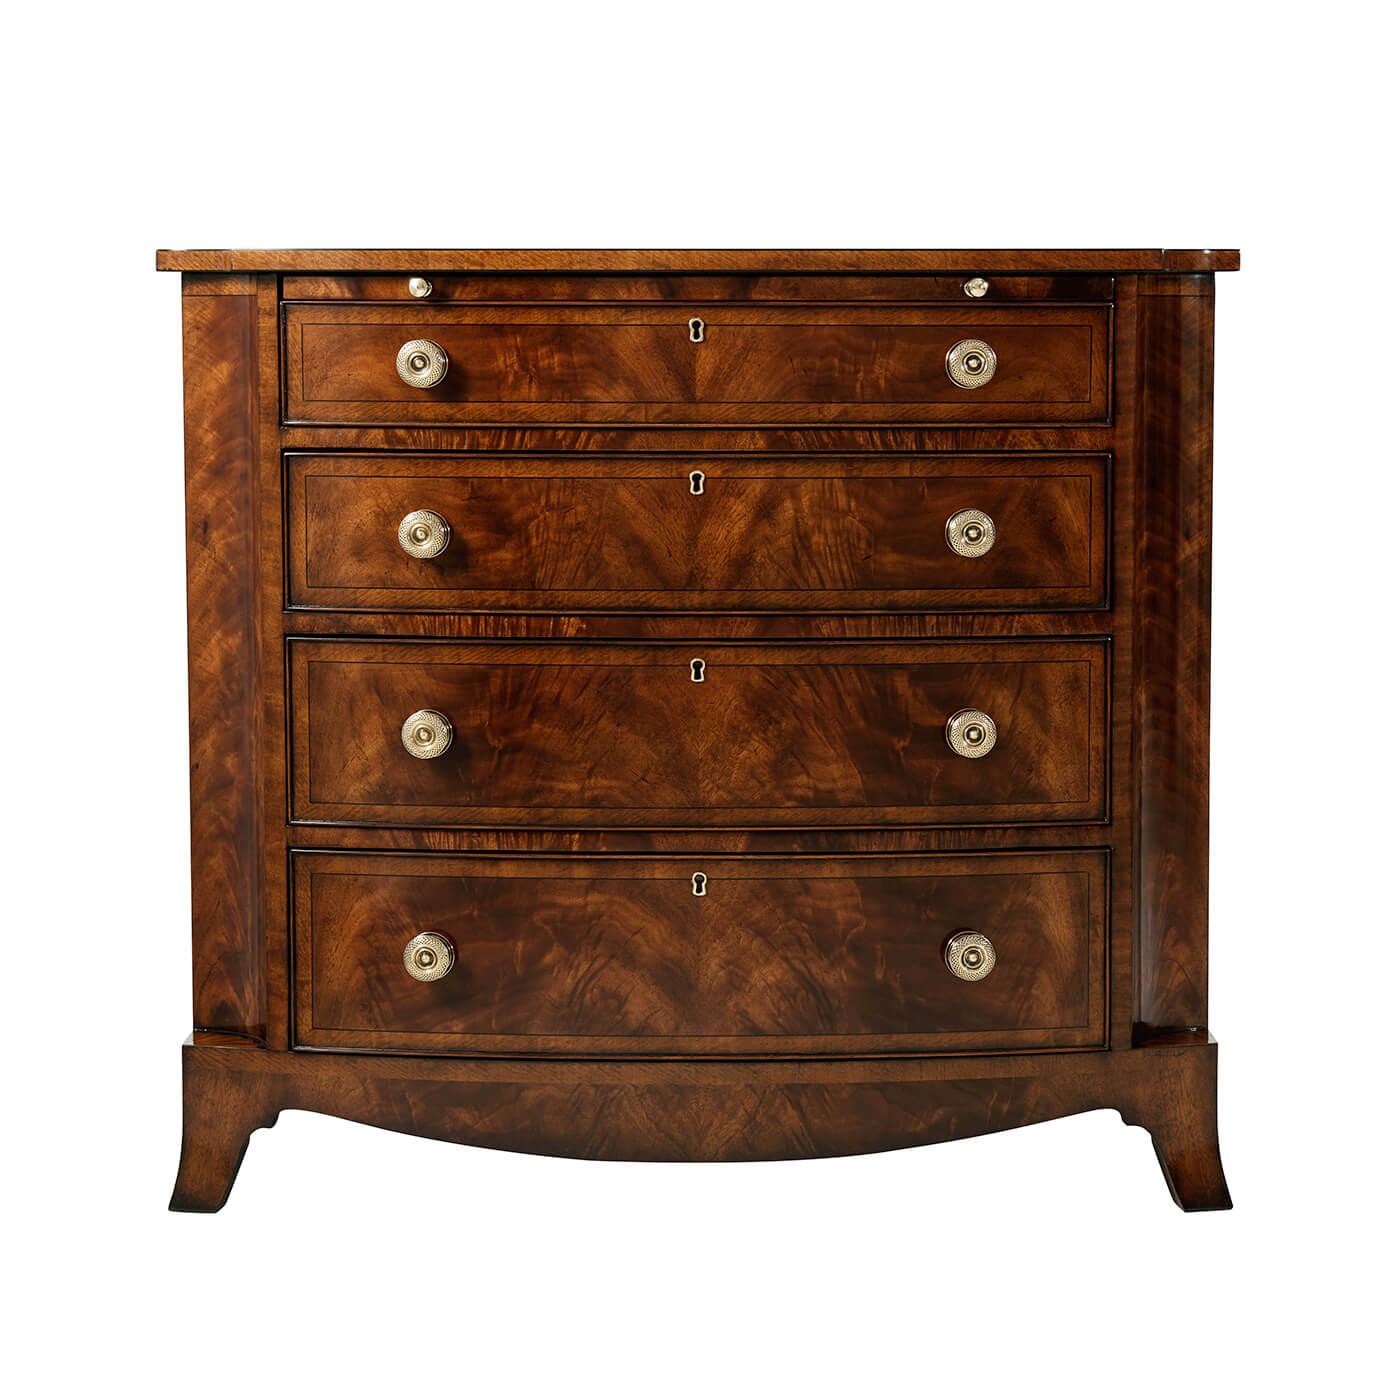 A Regency style figured mahogany chest of drawers, the bowfront satinwood crossbanded top with concave corners and uprights, above a veneered slide and four graduated bowfront drawers, with natural brass handles, on splay legs. 

Dimensions: 36